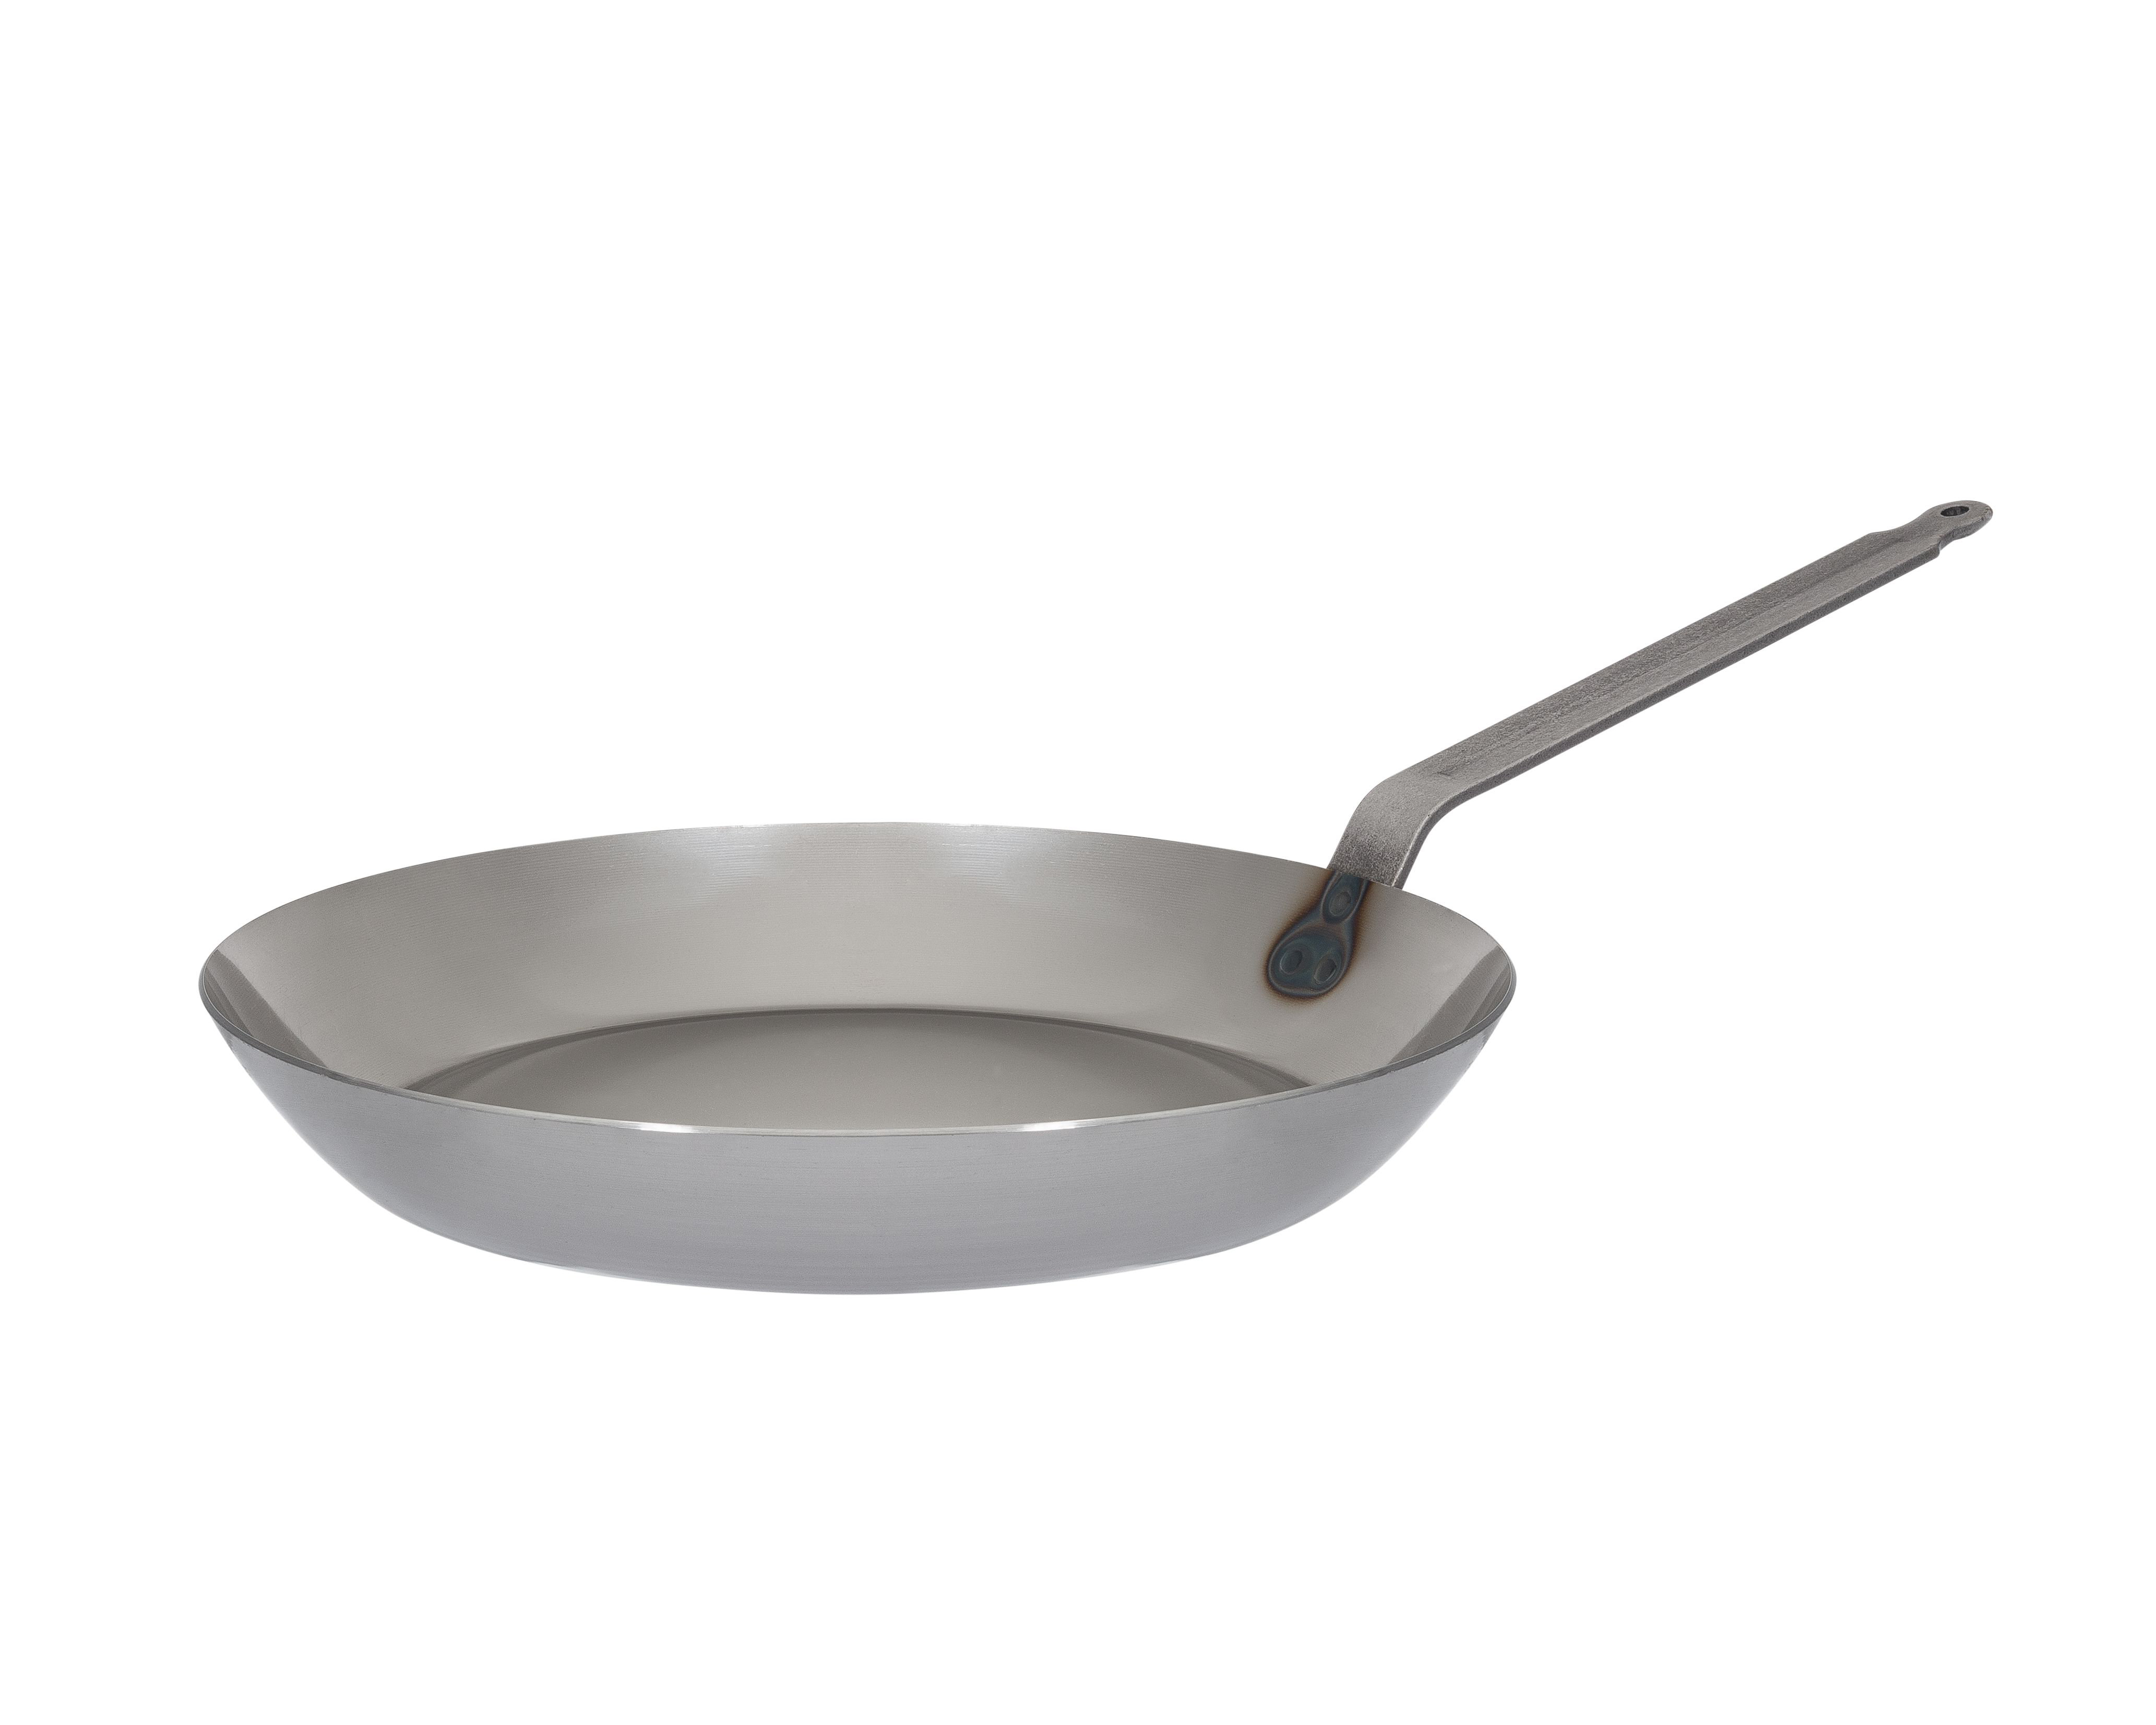 Le Creuset 3-Ply Stainless Steel 20cm Non-Stick Omelette Pan